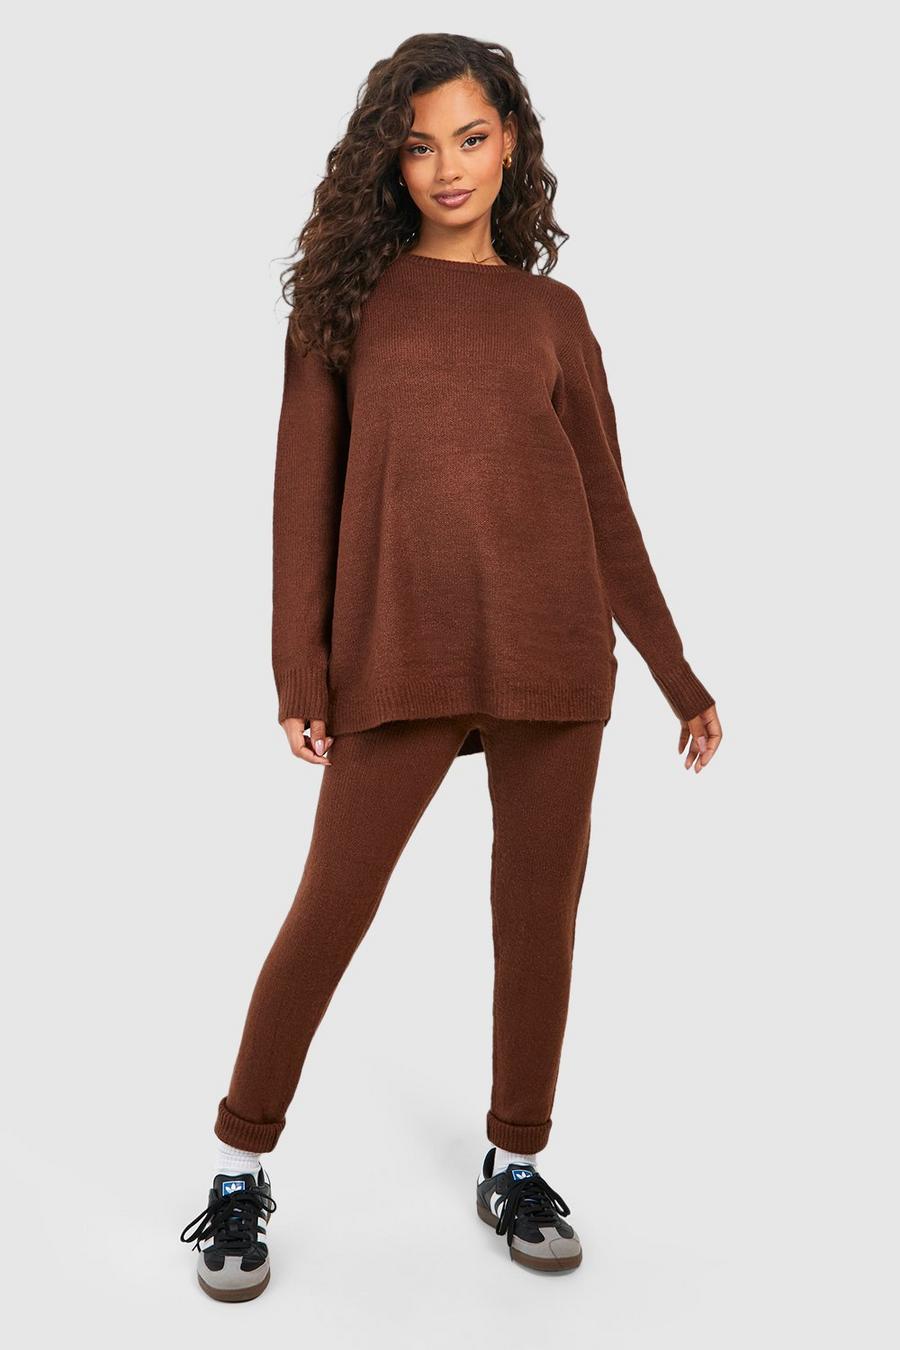 Brown Soft Knit Crew Neck Sweater & Pants Two-Piece